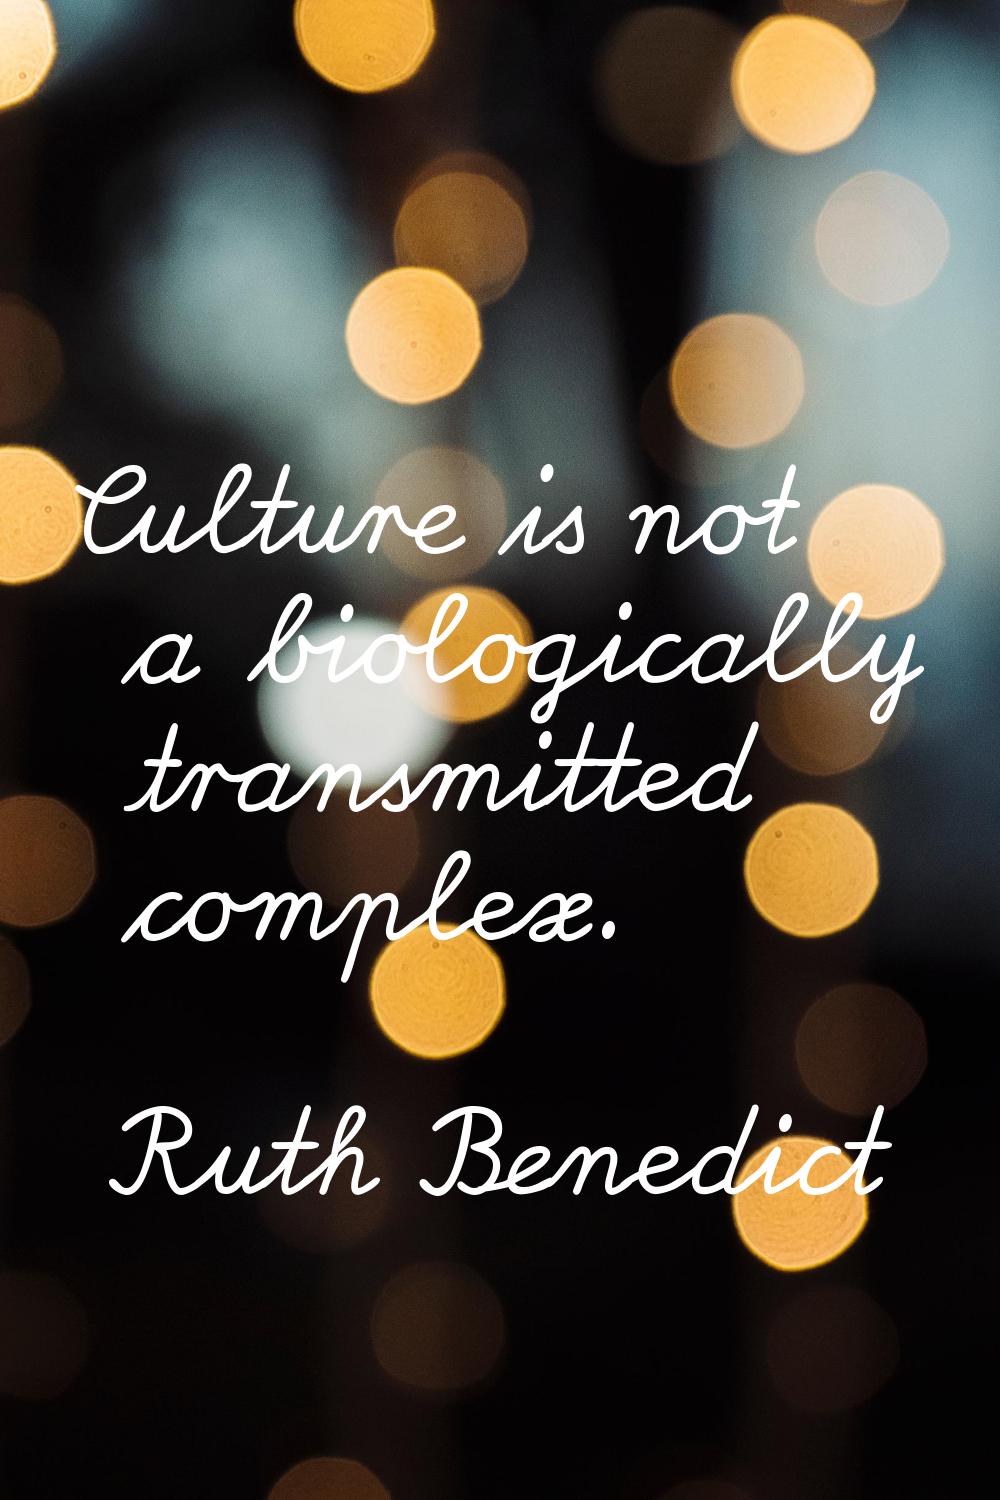 Culture is not a biologically transmitted complex.